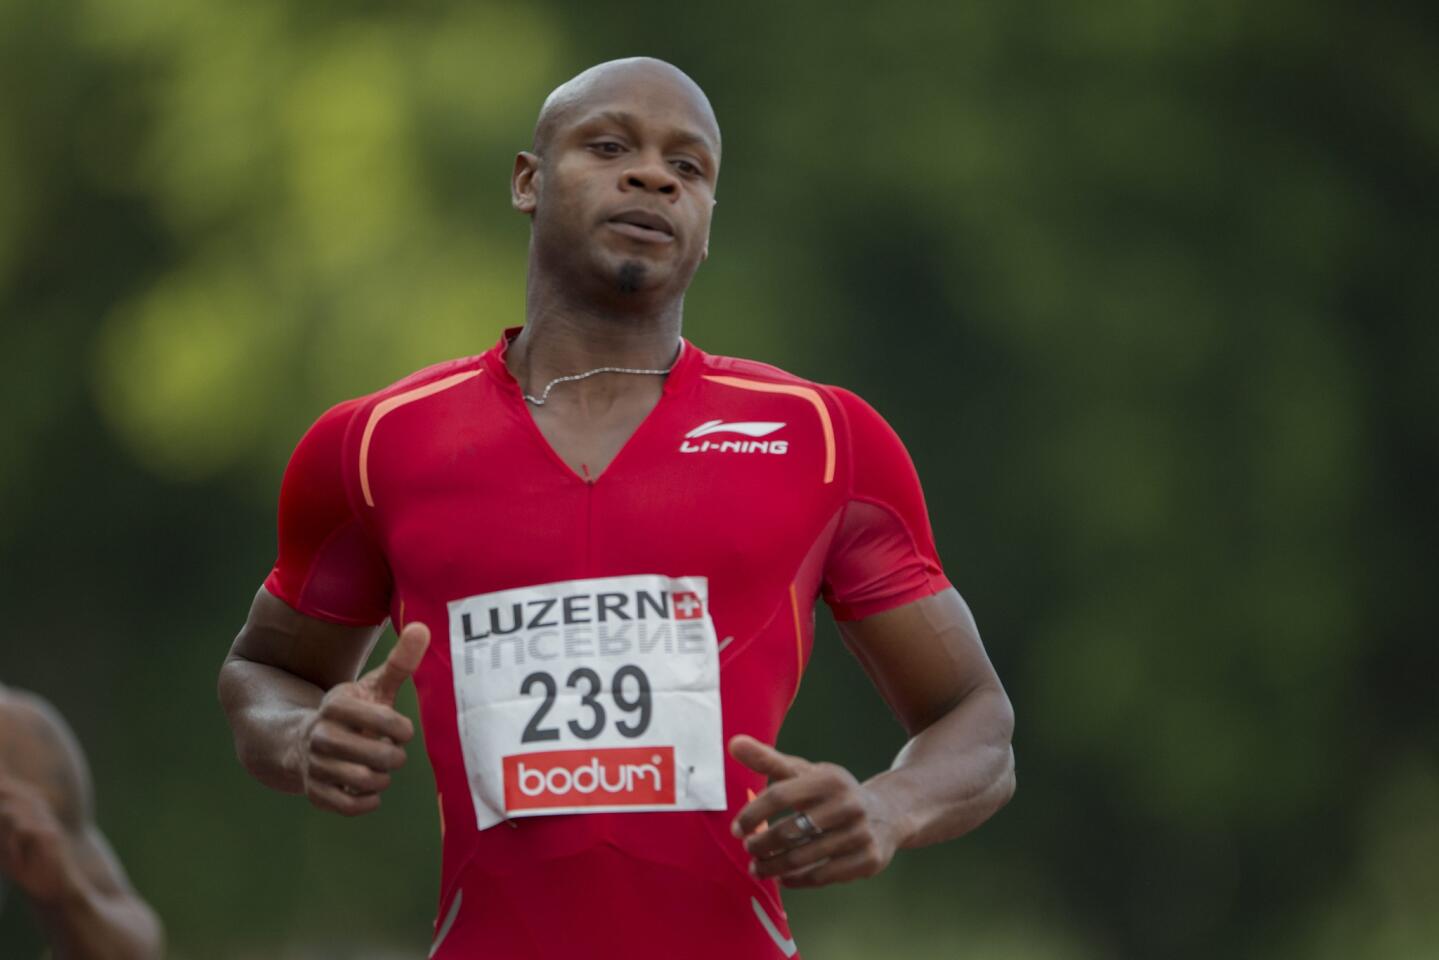 Jamaican sprinter Asafa Powell during the men's 100m race at the International Athletics Meeting in Lucerne, Switzerland on July 14.